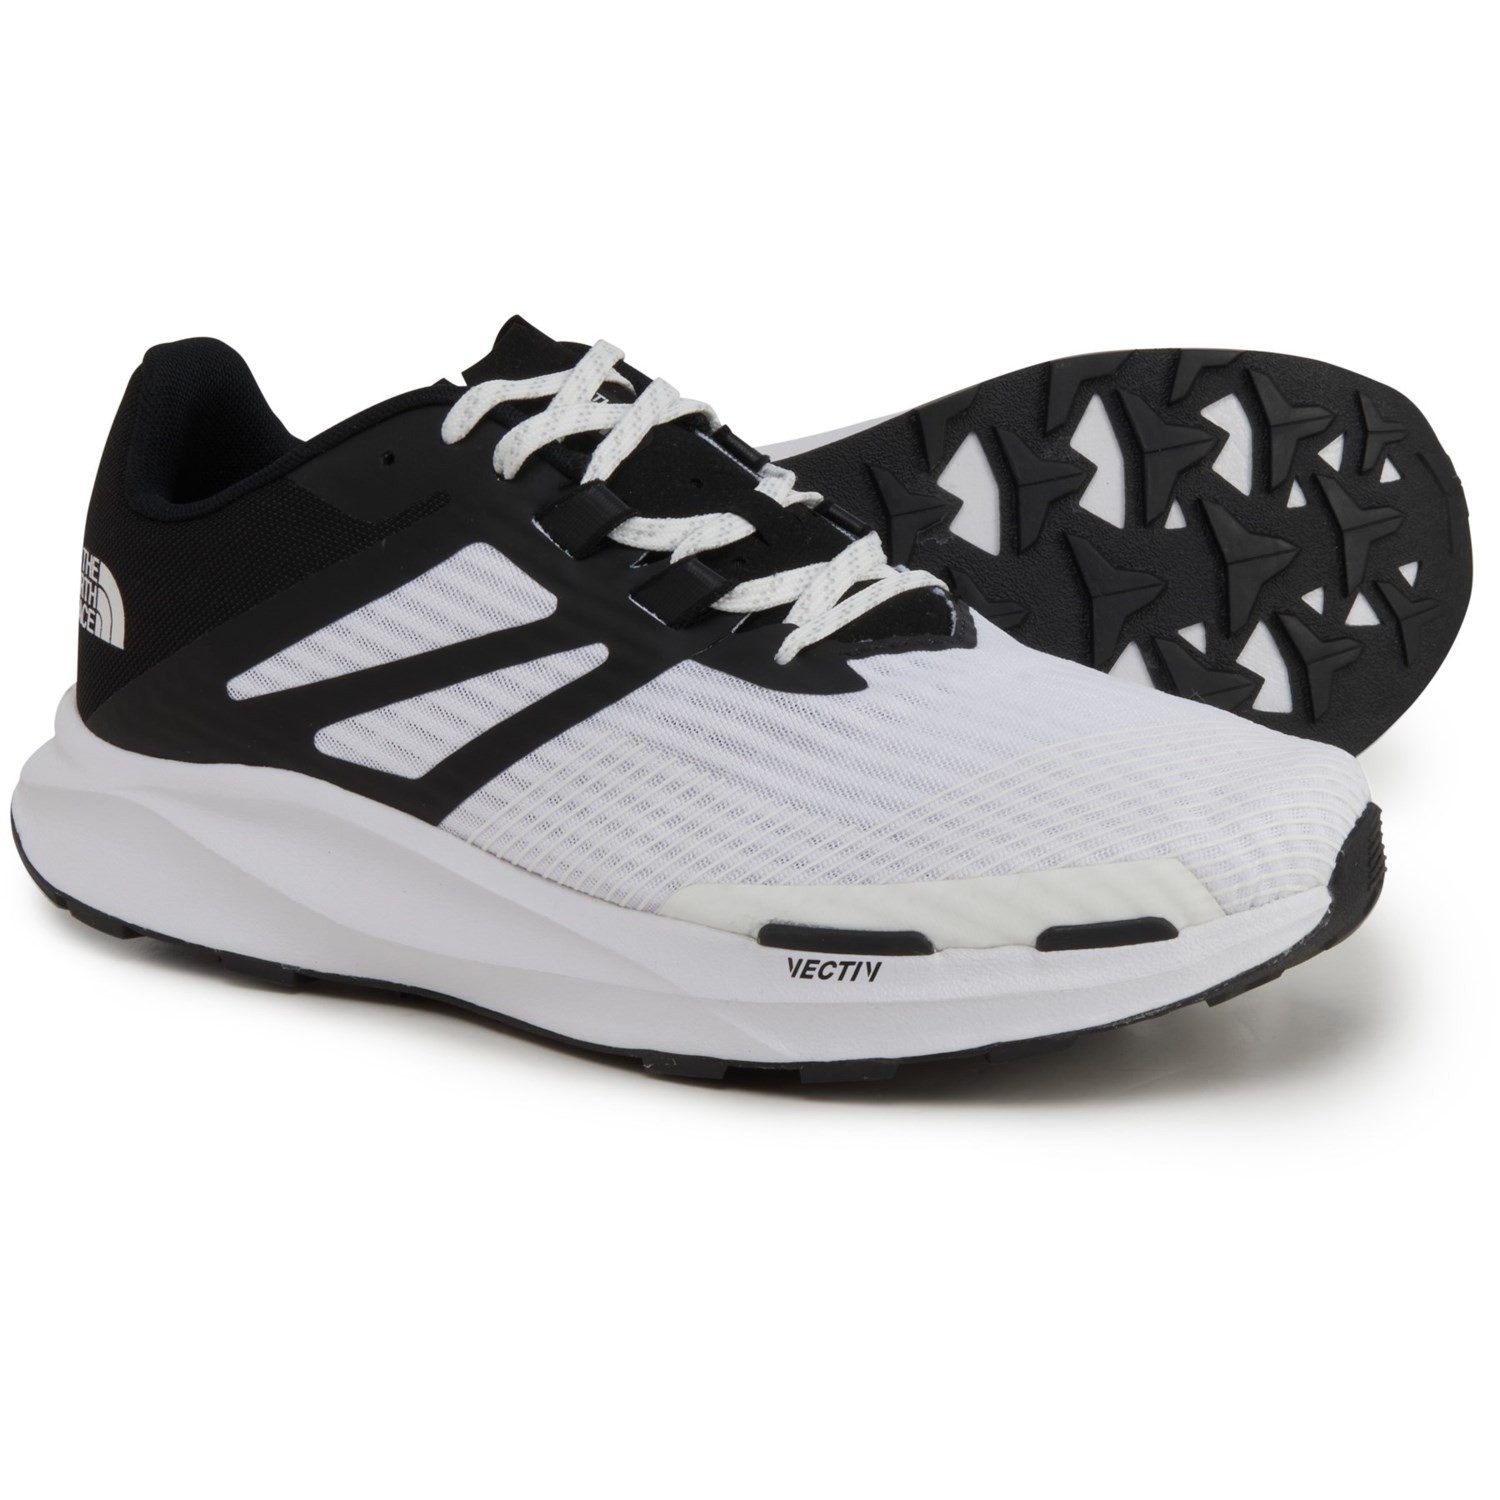 The North Face VECTIV Eminus Trail Running Shoes (For Men)